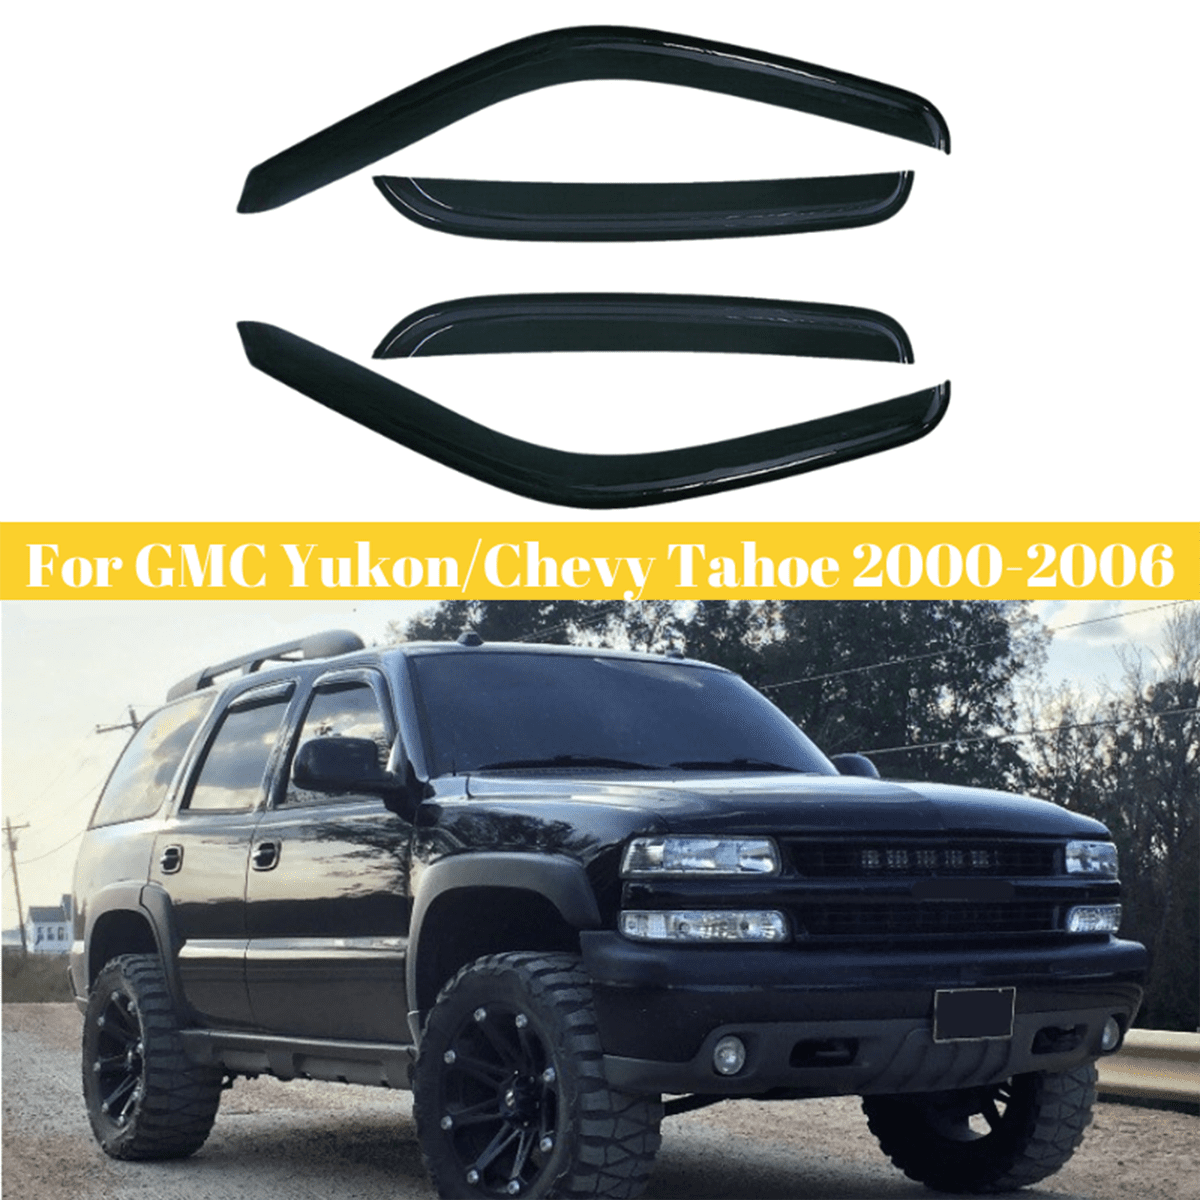 Wind Deflector /& Bug Shield Combo For Chevy Tahoe 2000-2006